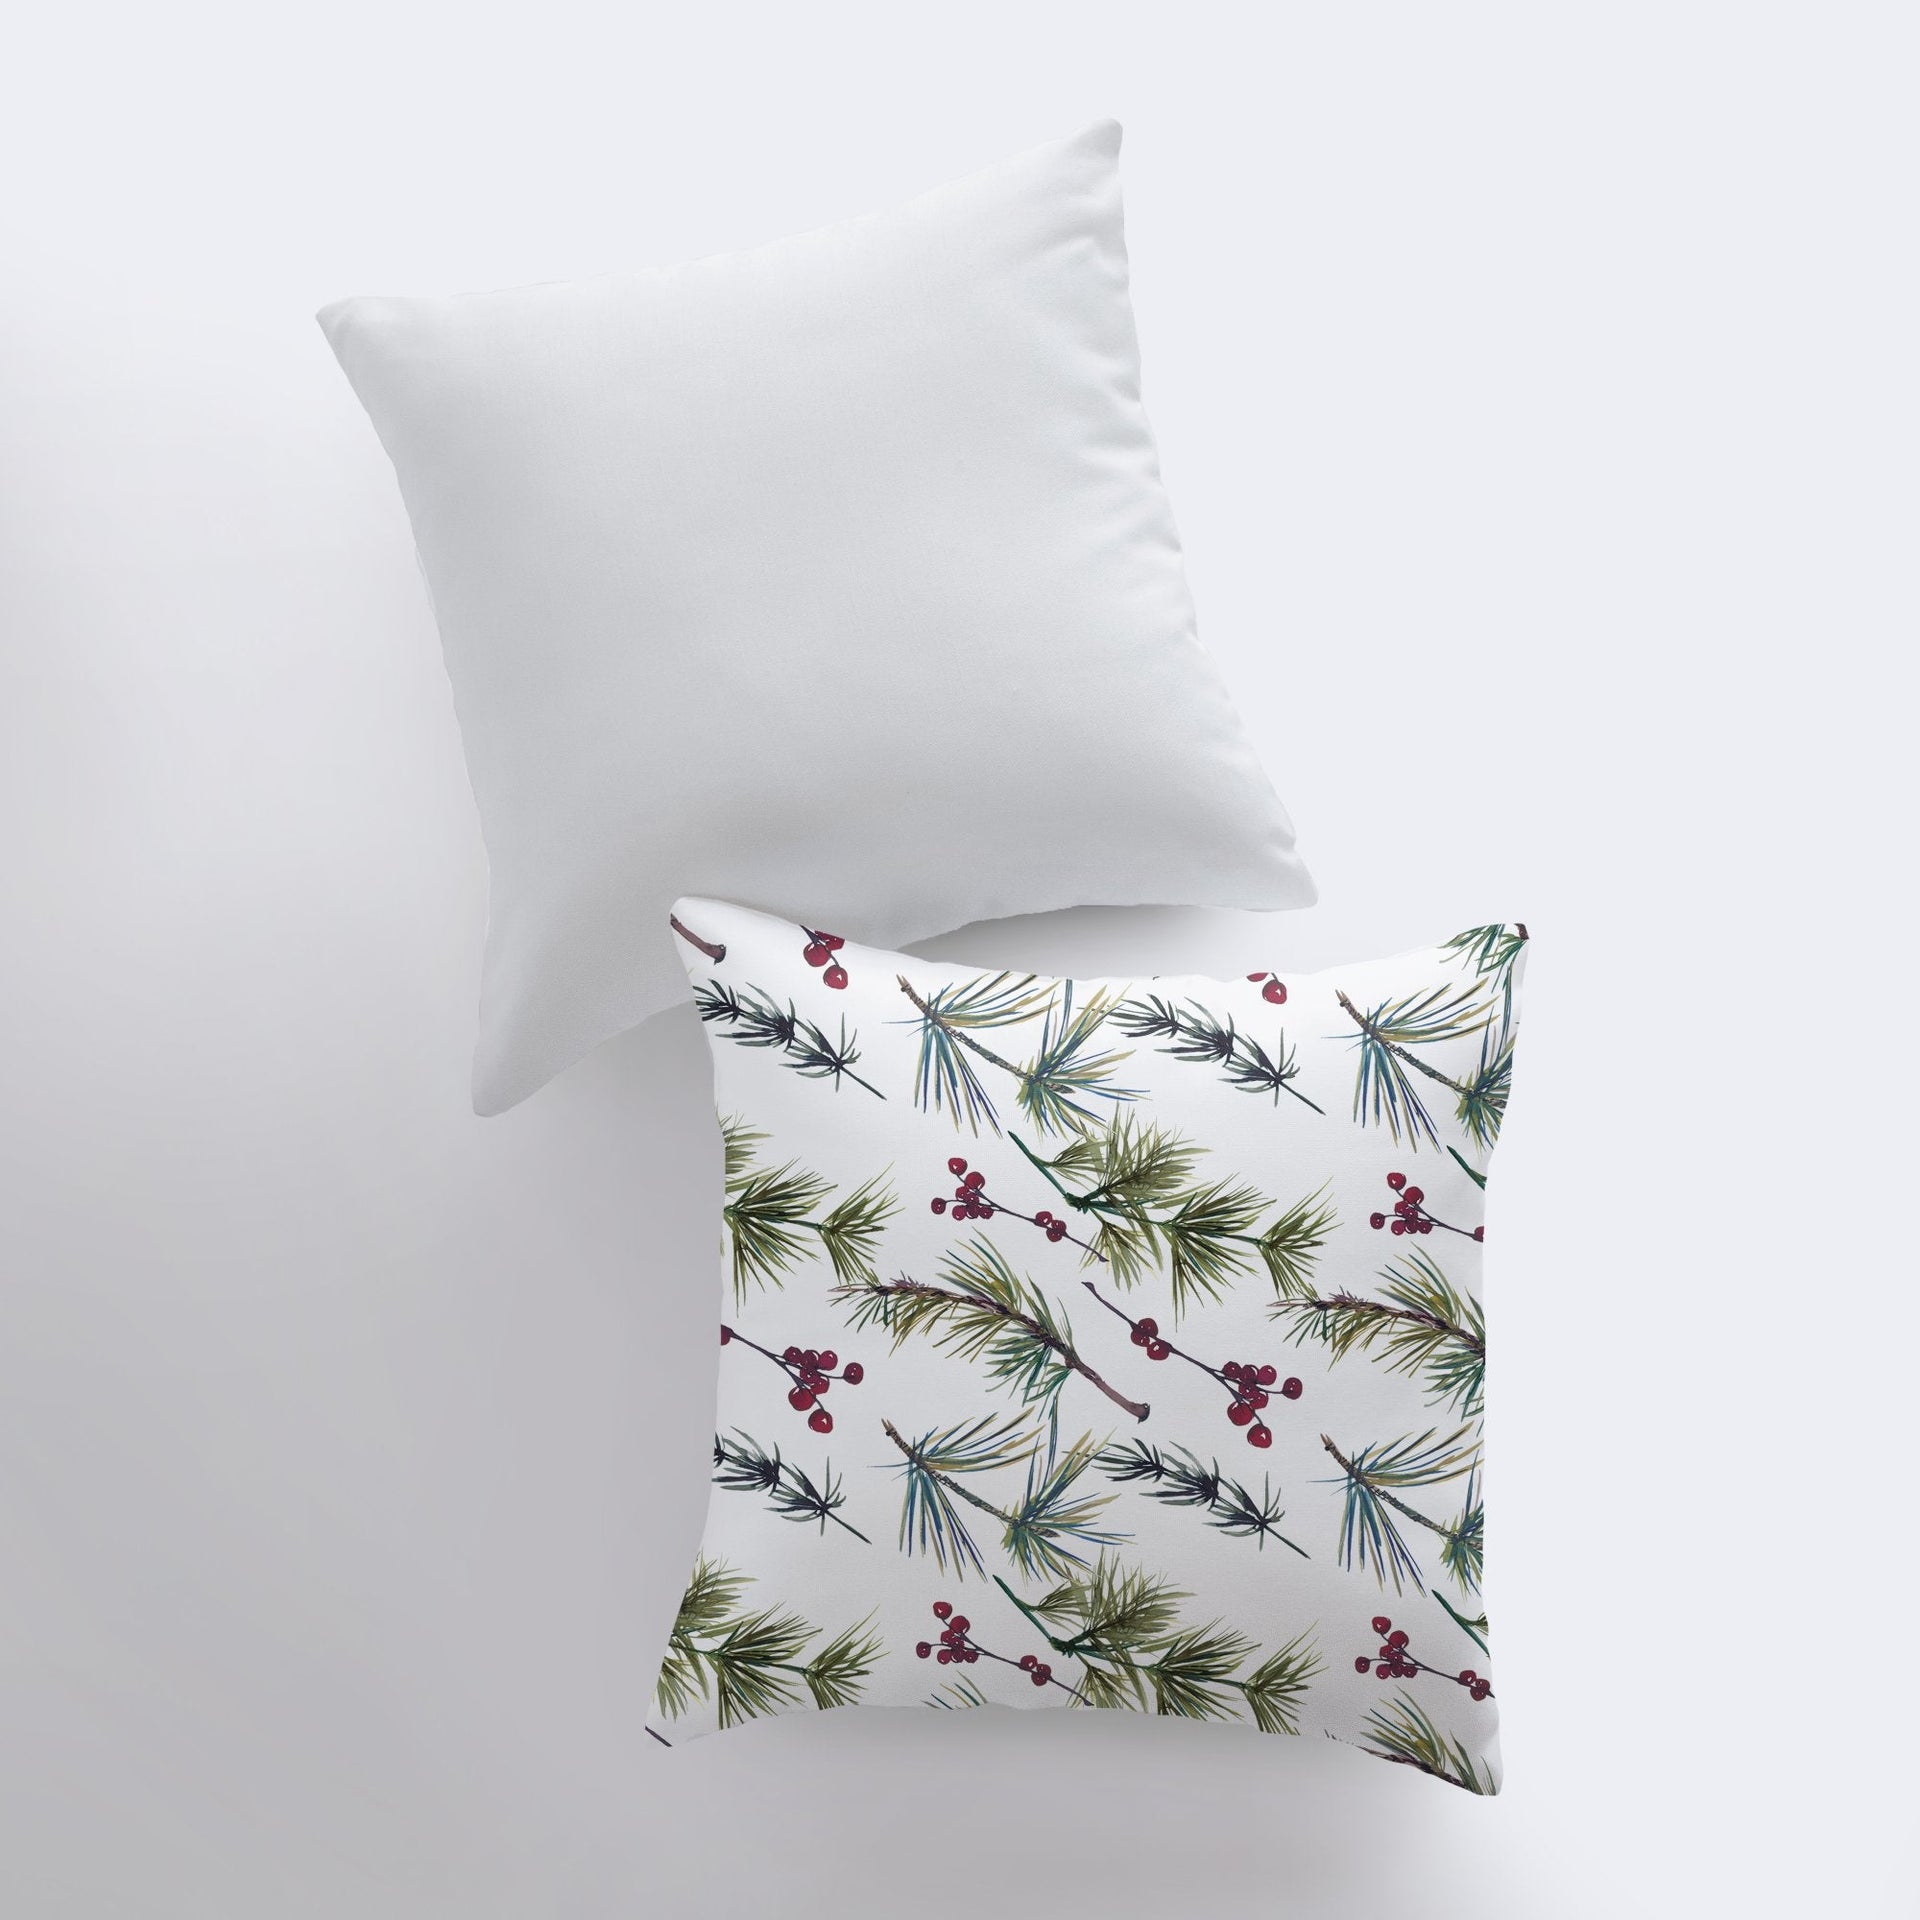 Christmas Holly Berries and Twigs Throw Pillow Cover |  Pillow Cover | - Mercantile Mountain